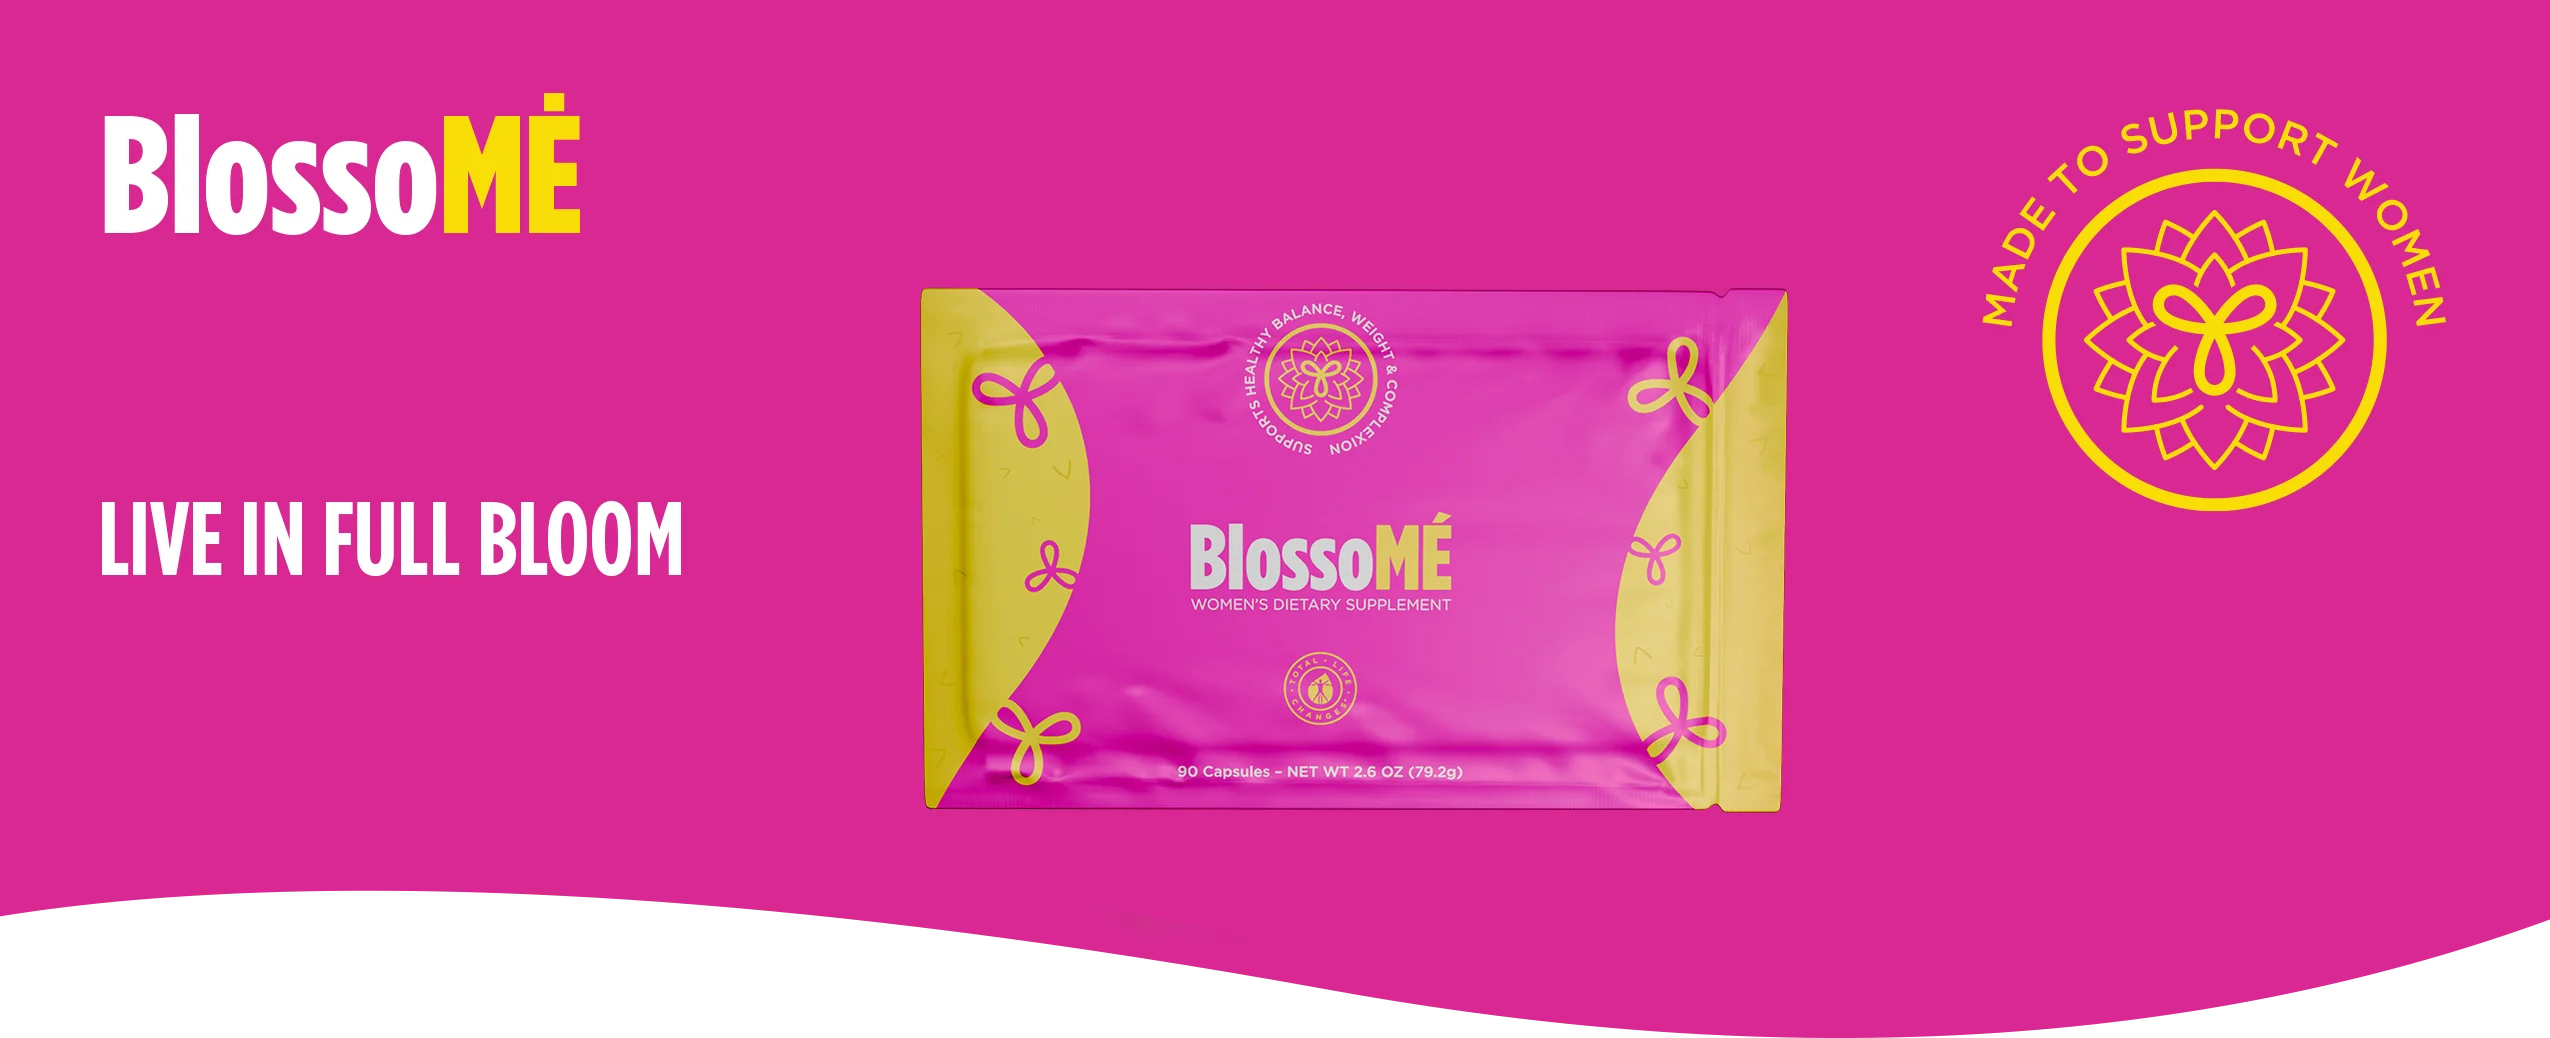 BlossoME support women’s health